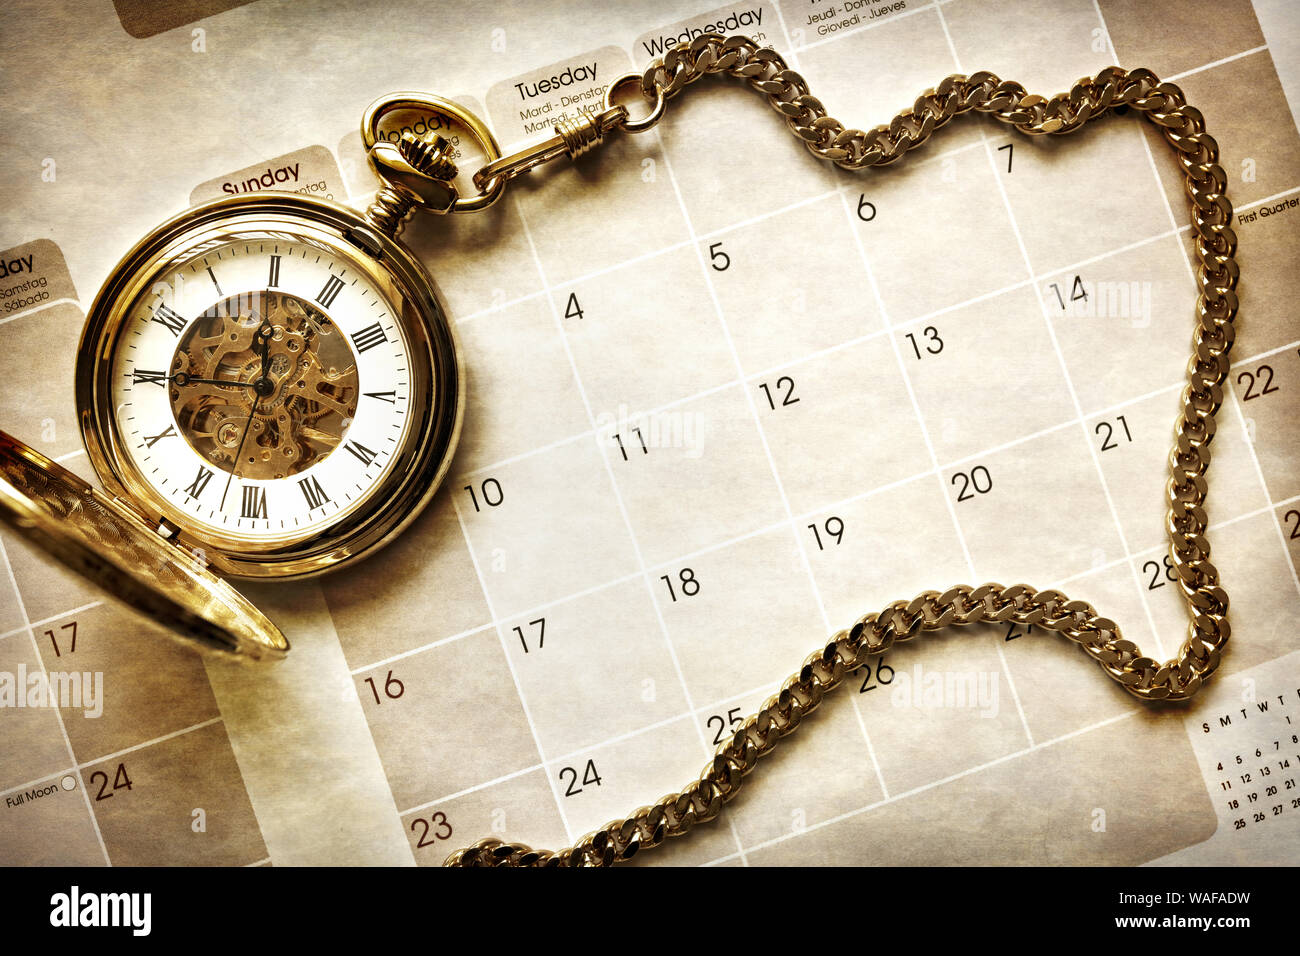 Time management, gold pocket watch on blank calendar background Stock Photo